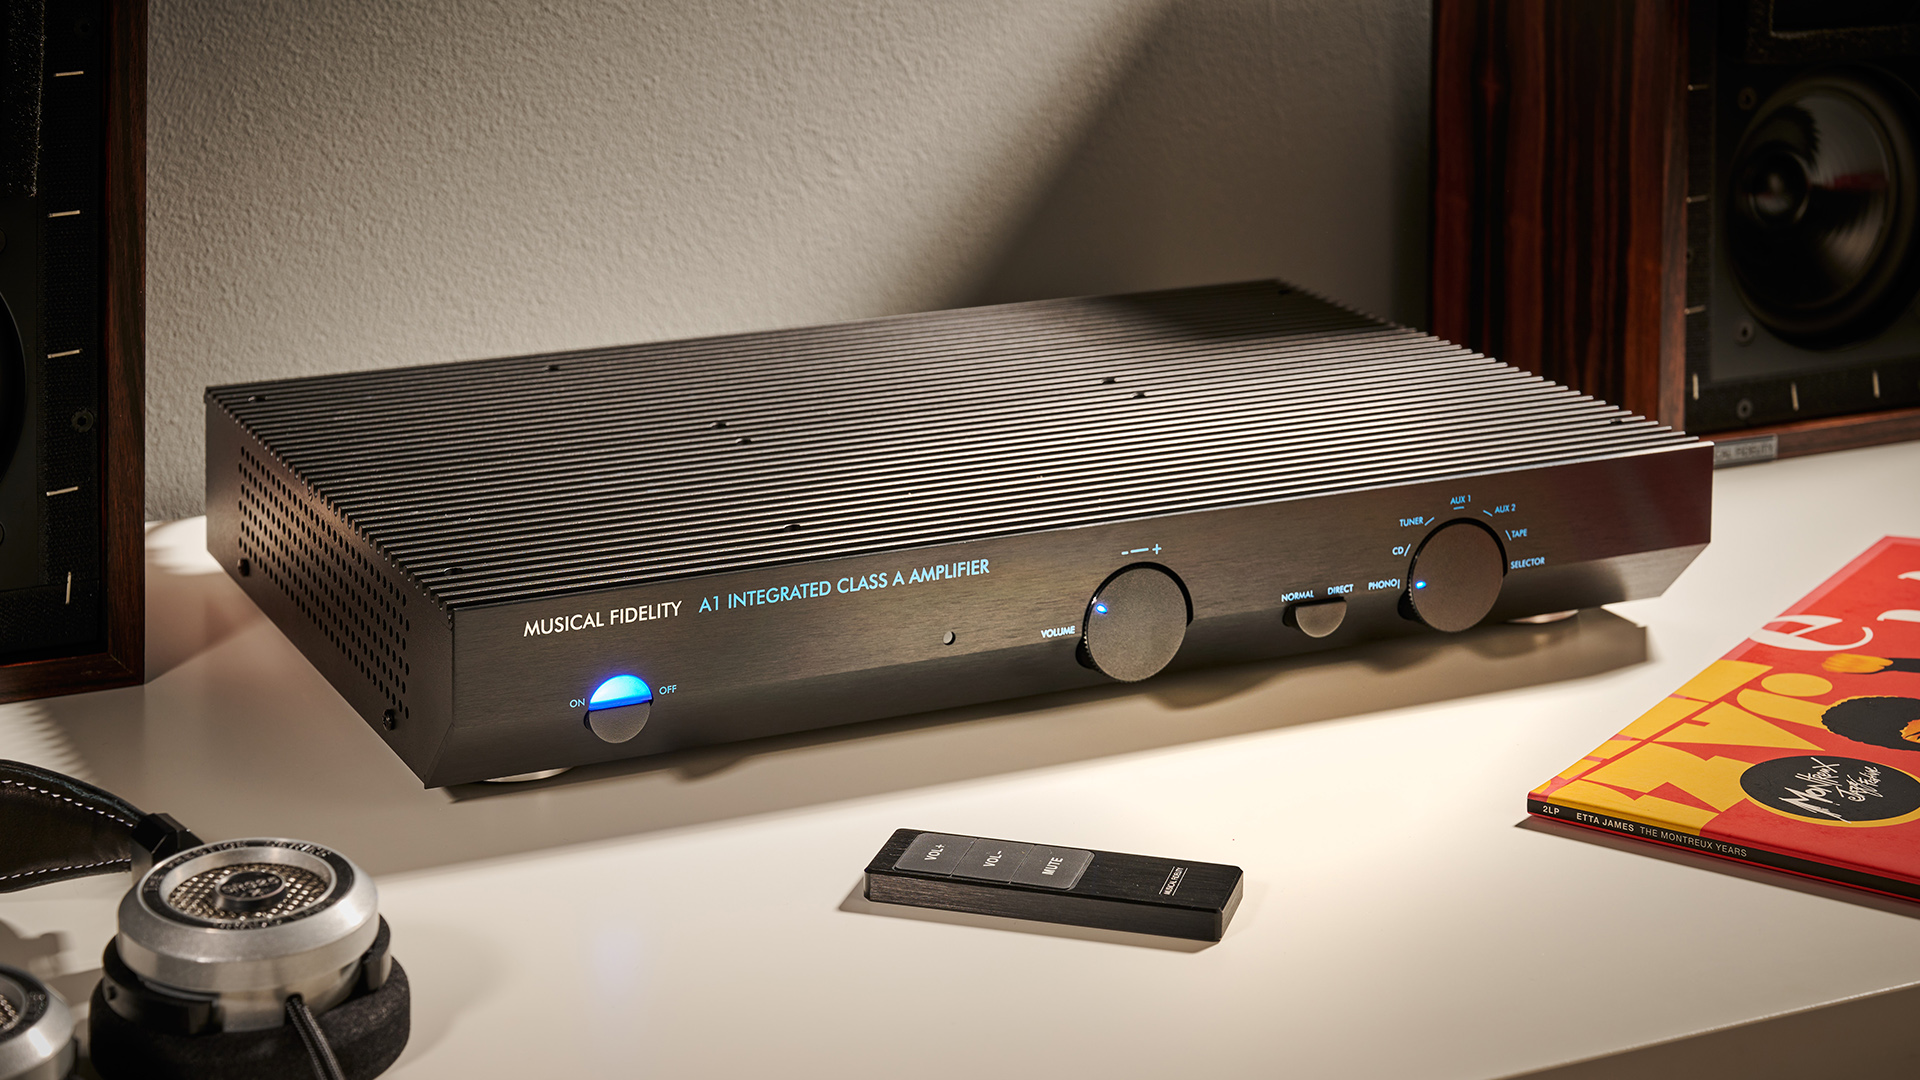 Musical Fidelity A1 review: an iconic amplifier design of the 